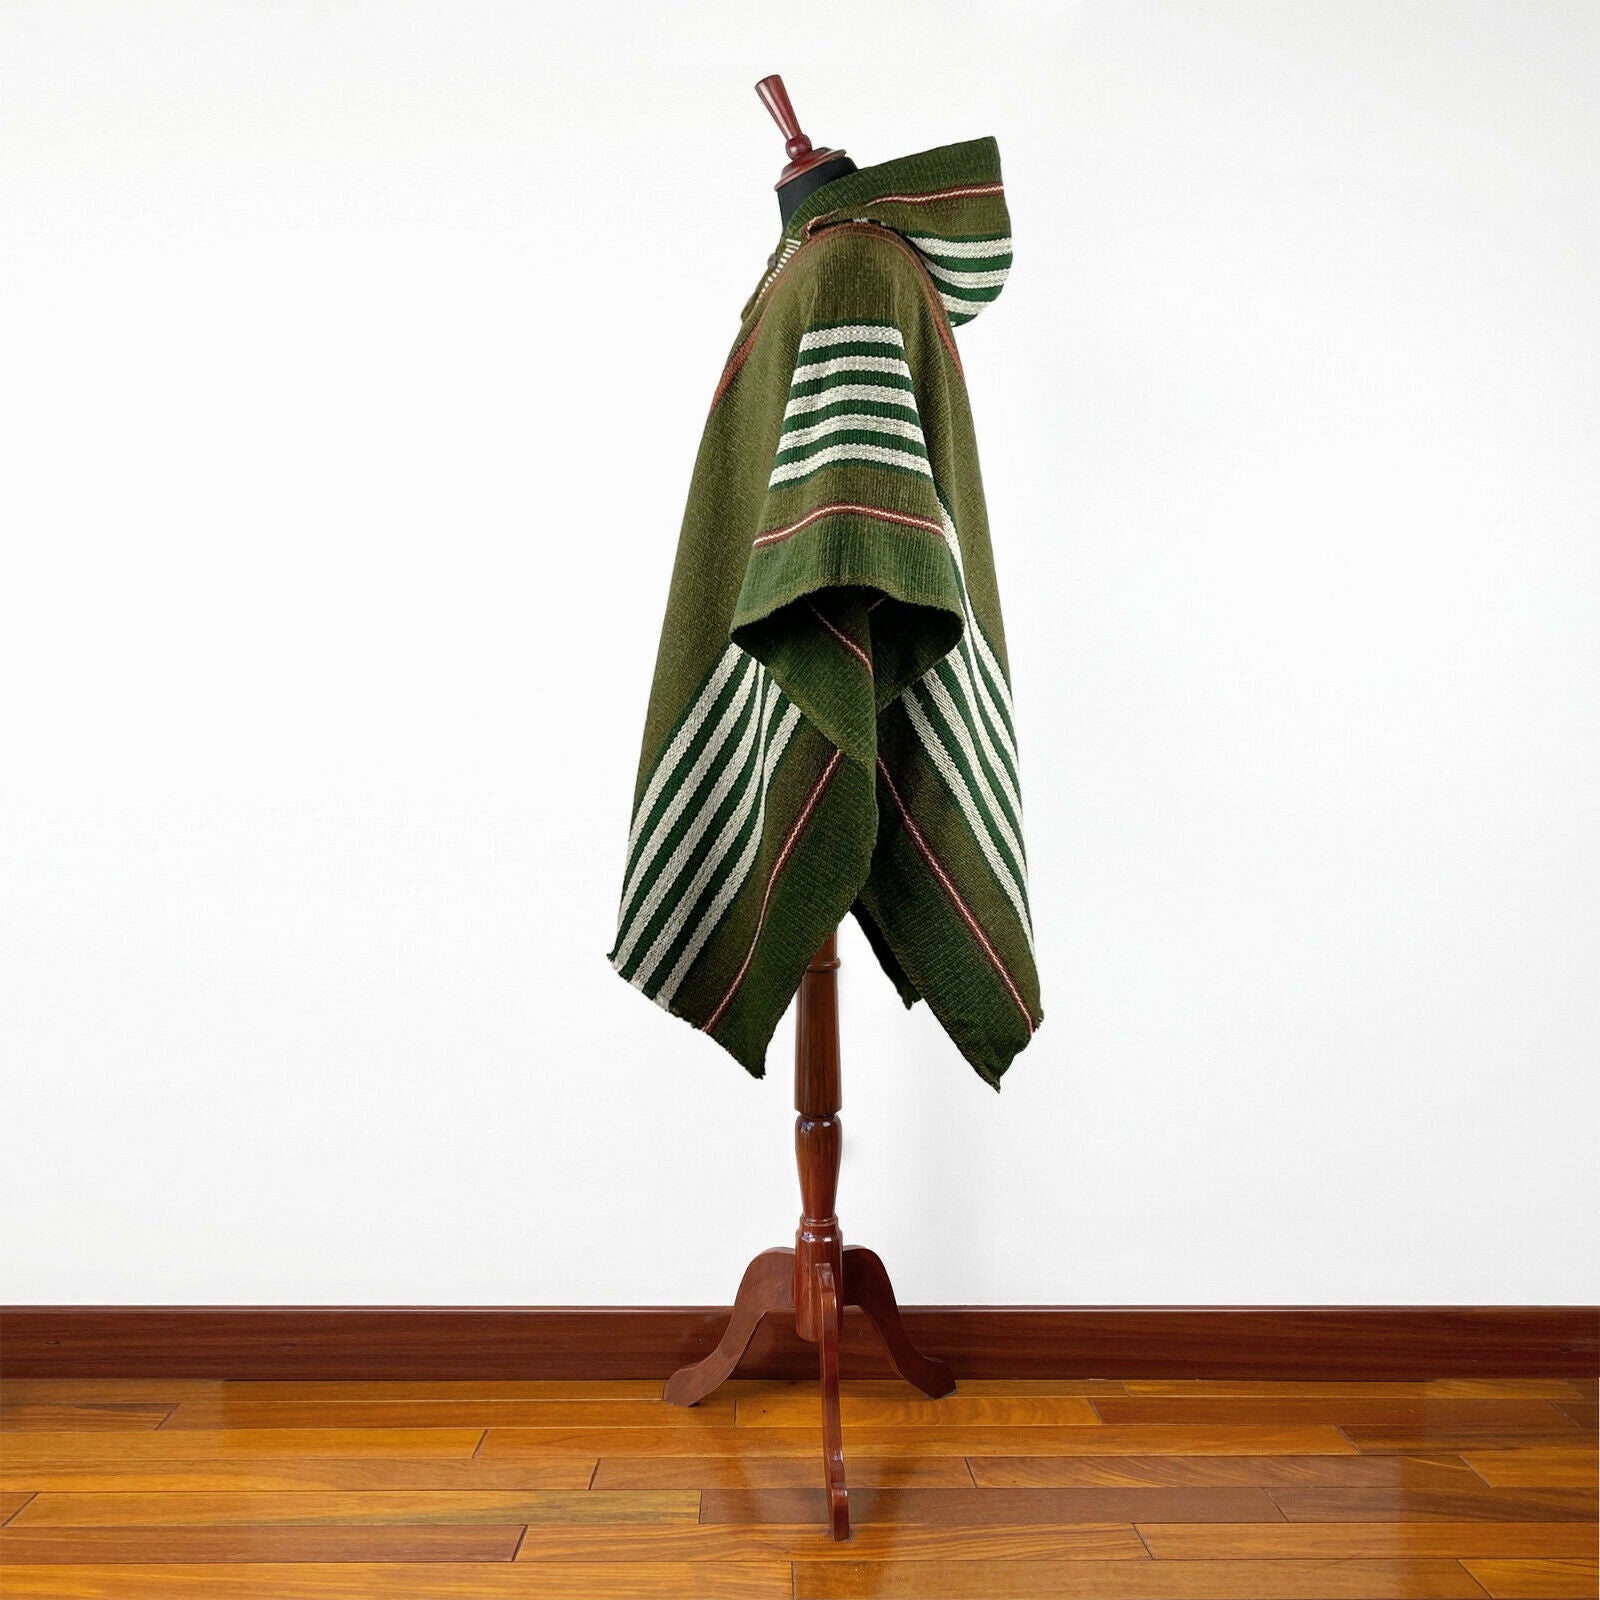 Mayaicu - Llama Wool Unisex South American Handwoven Thick Hooded Poncho - striped - olive green